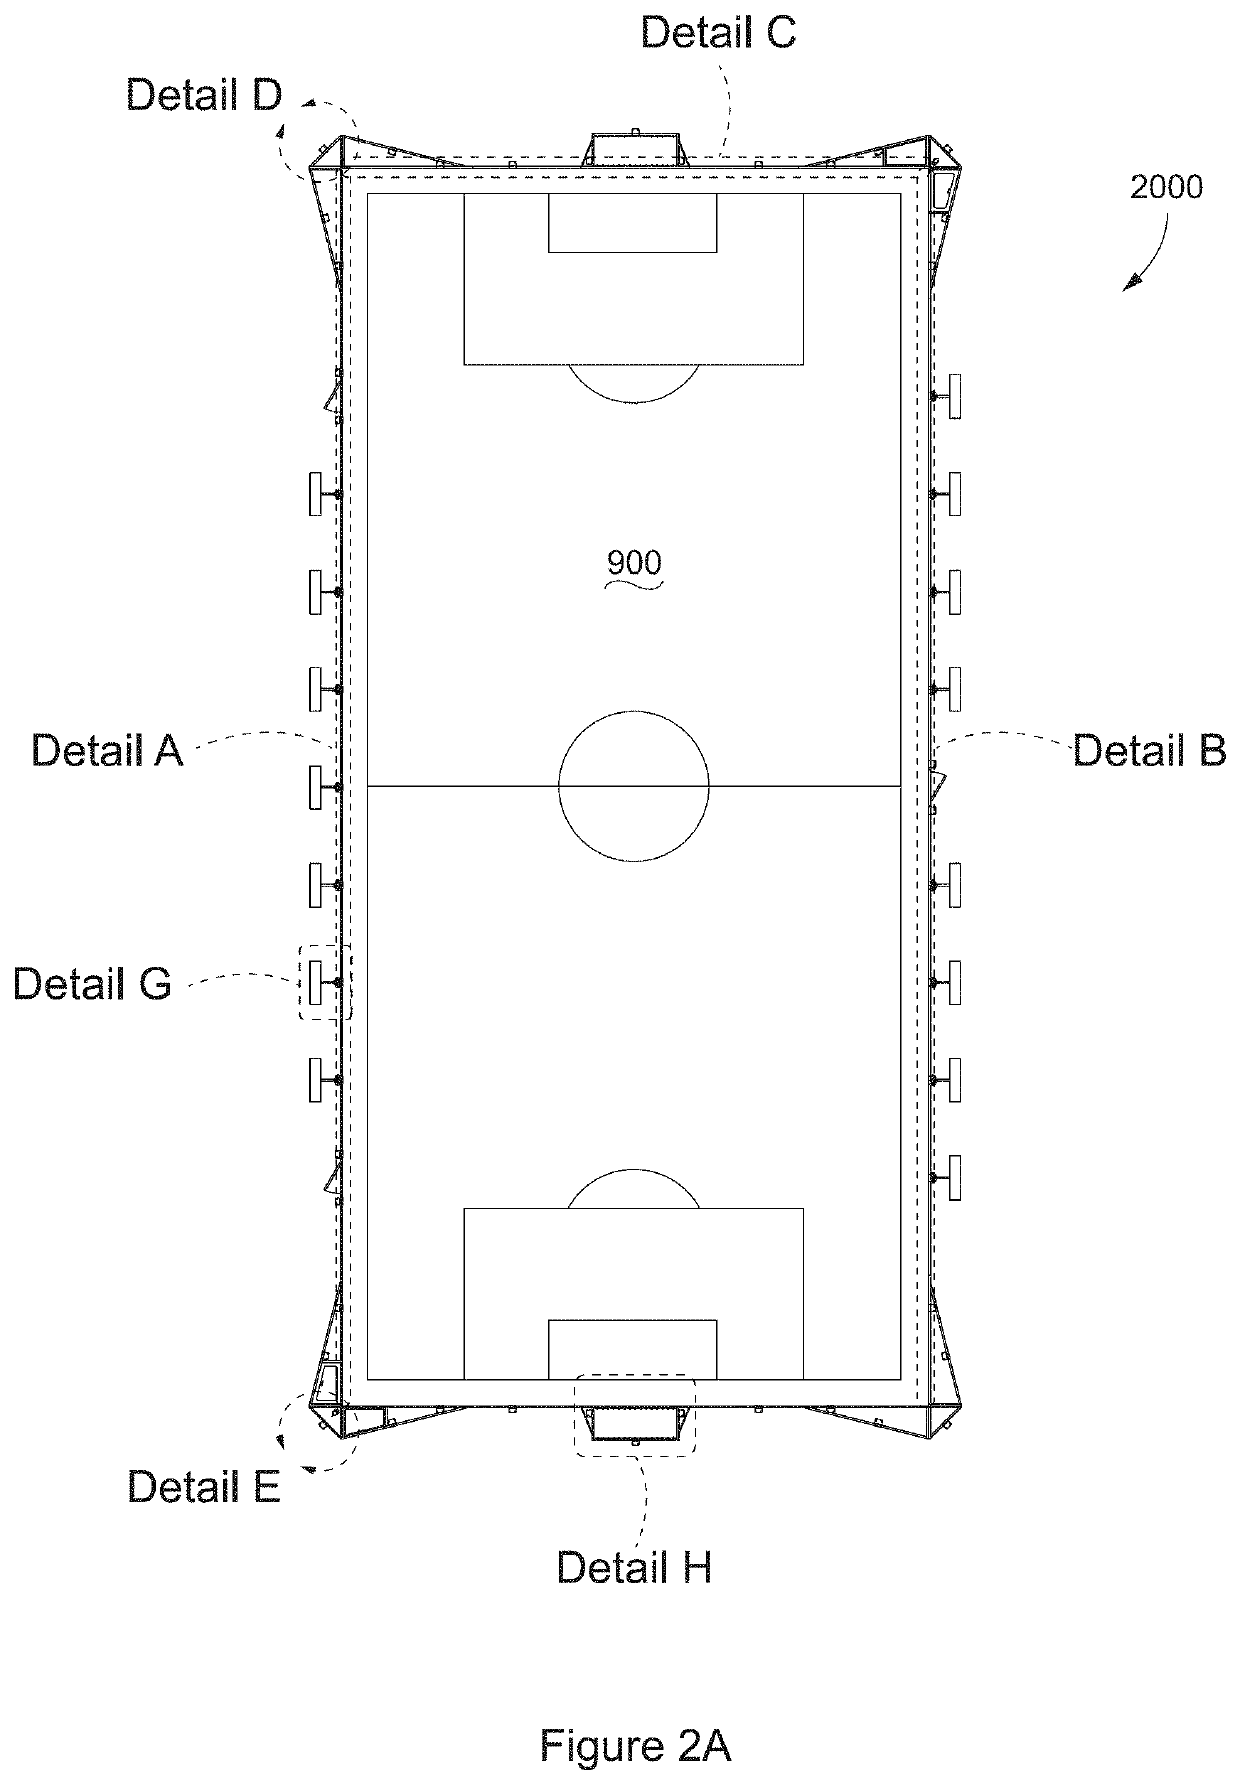 Apparatus and method for design and installation of a customizable soccer mini-pitch system